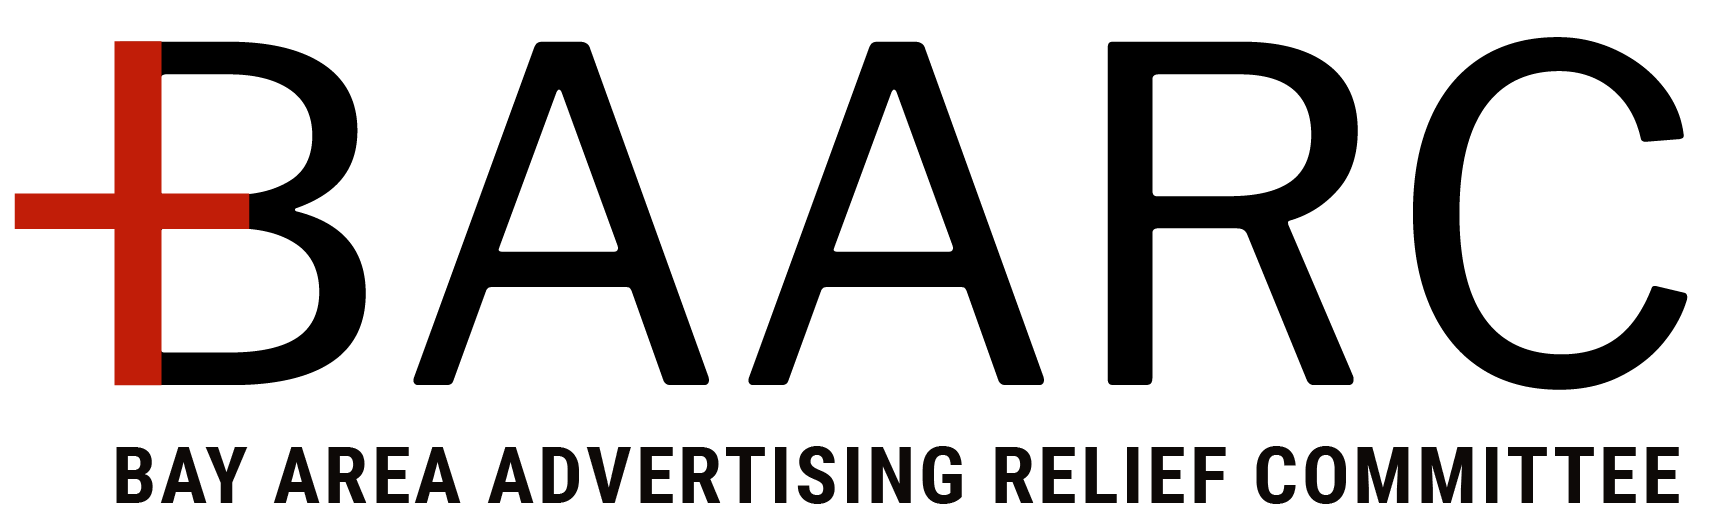 Bay Area Advertising Relief Committee